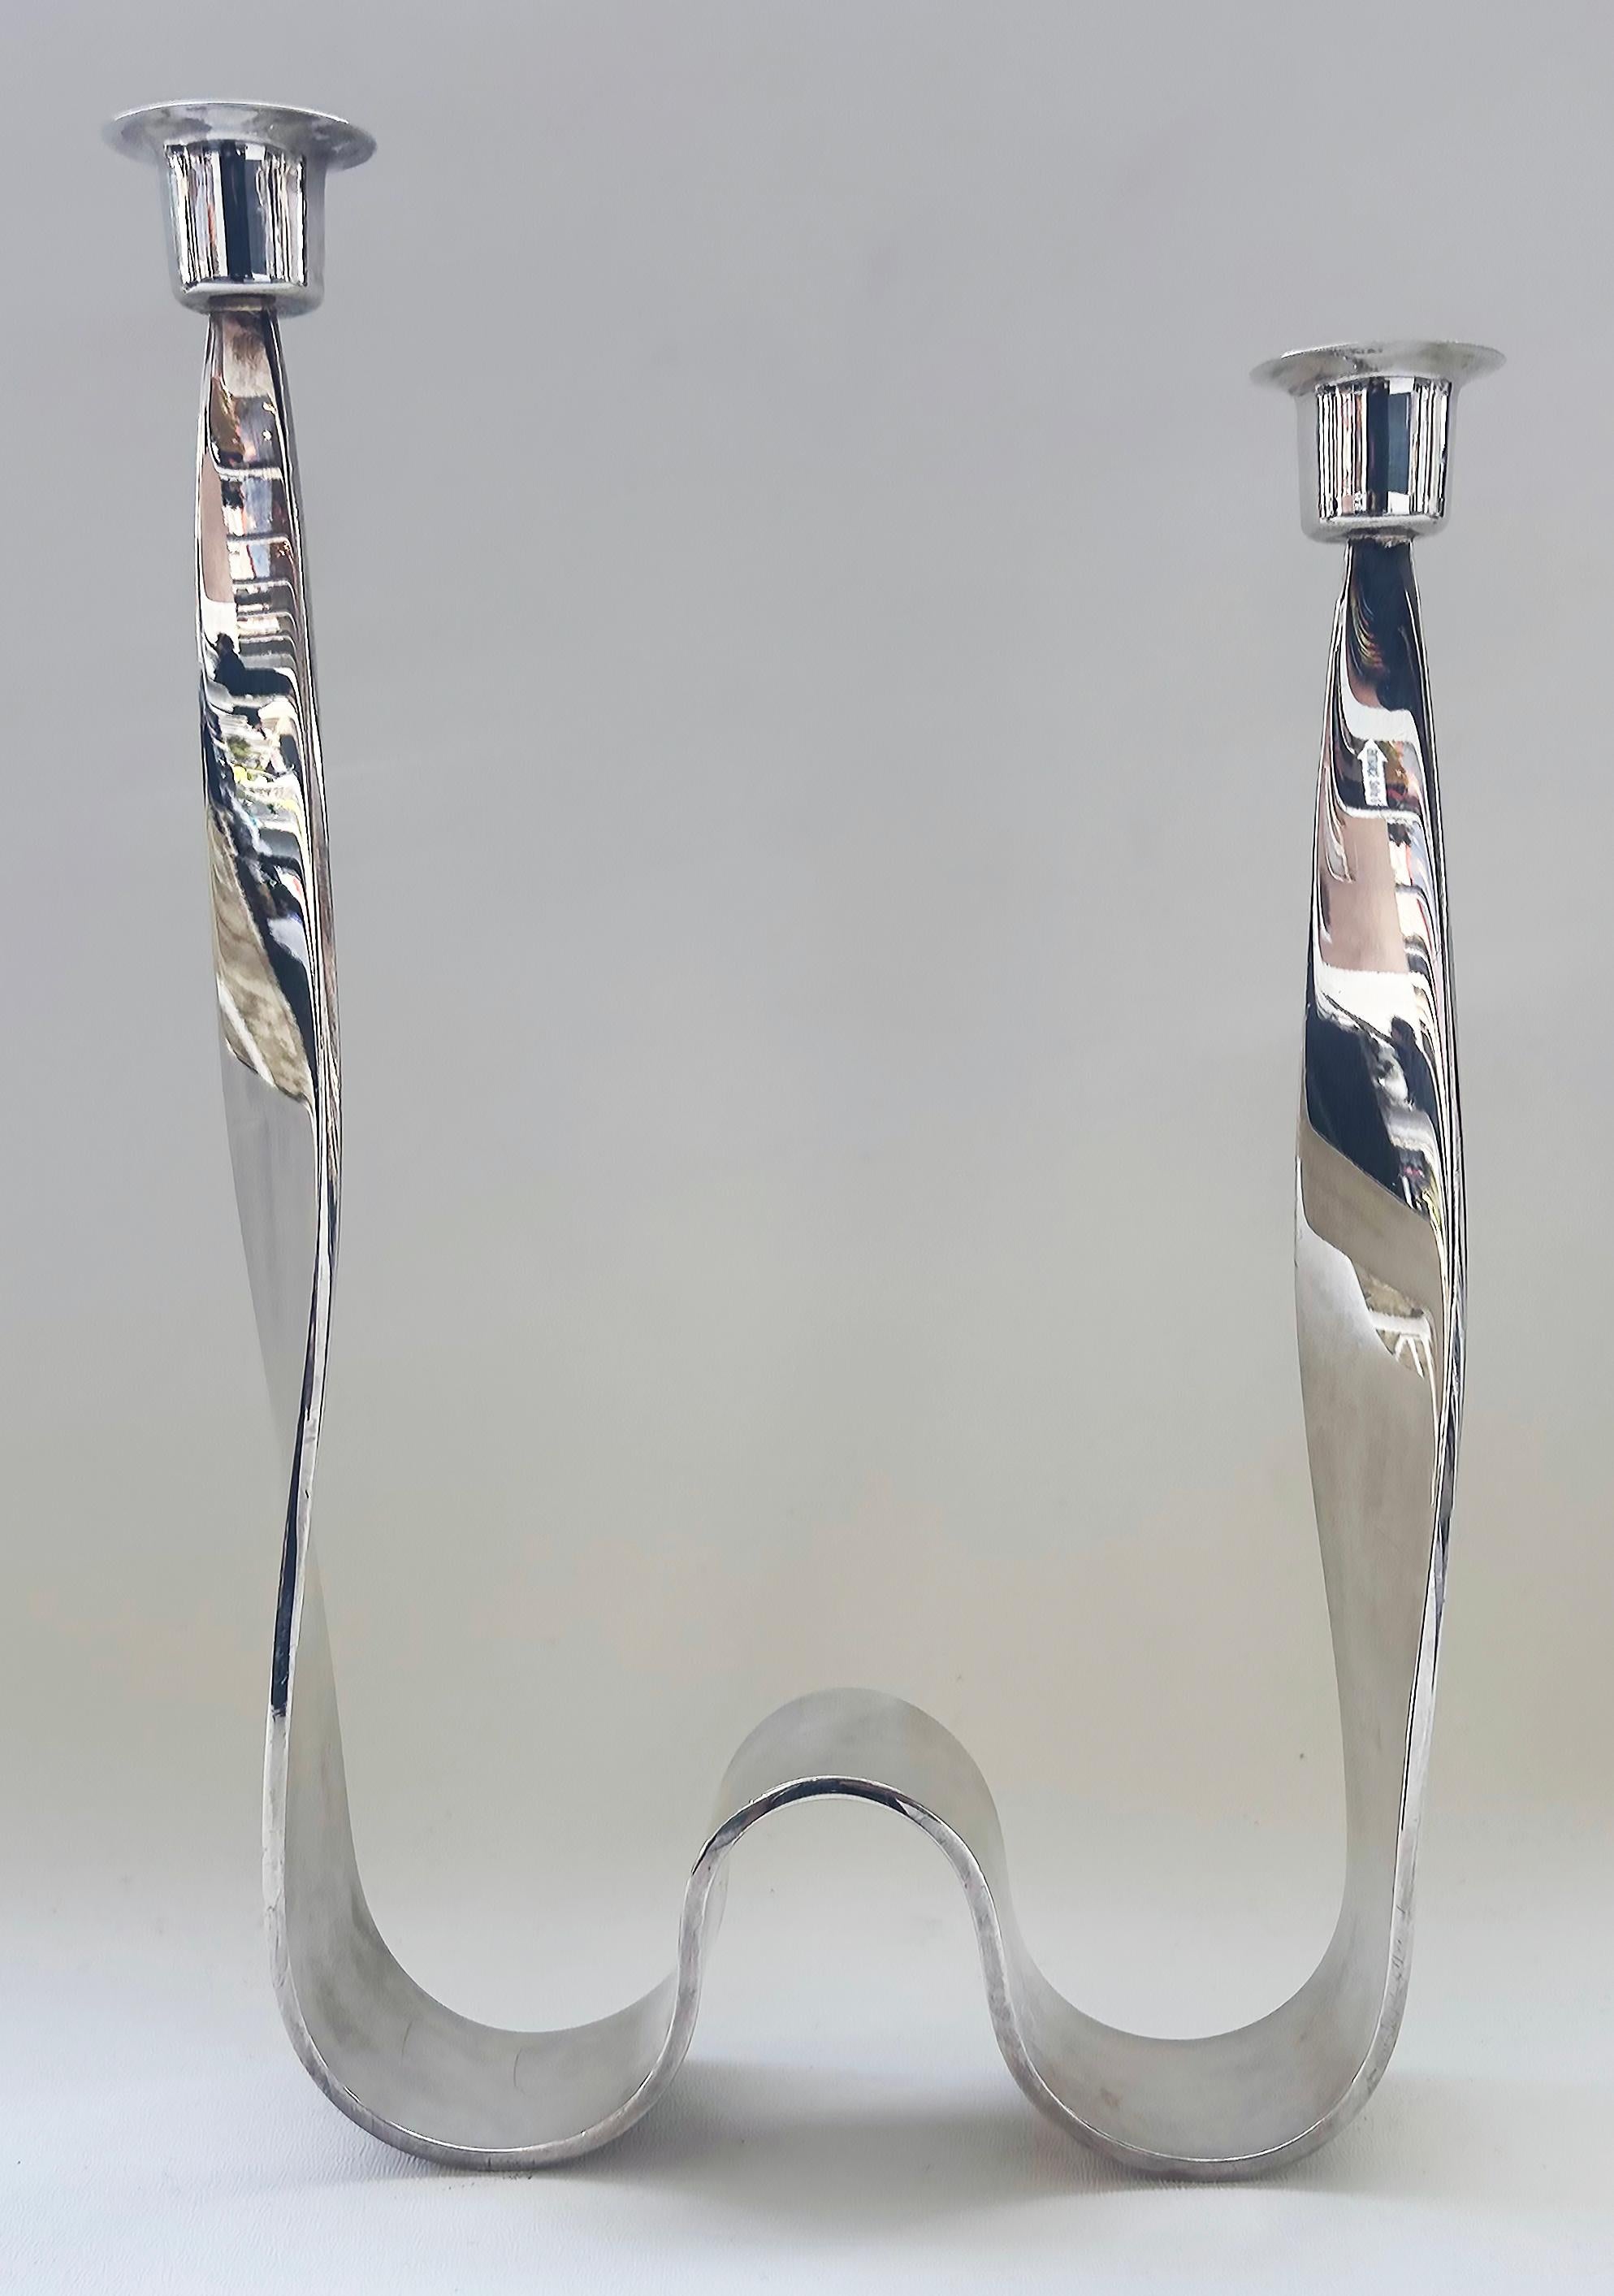  Guido Niest Atelier Italy Hand-made Silverplate Candle Holder

Offered for sale is a silverplate ribbon double candle holder by Guido Niest Atelier of Italy.  The handmade candle holder has a bright reflective finish and is signed on the base as